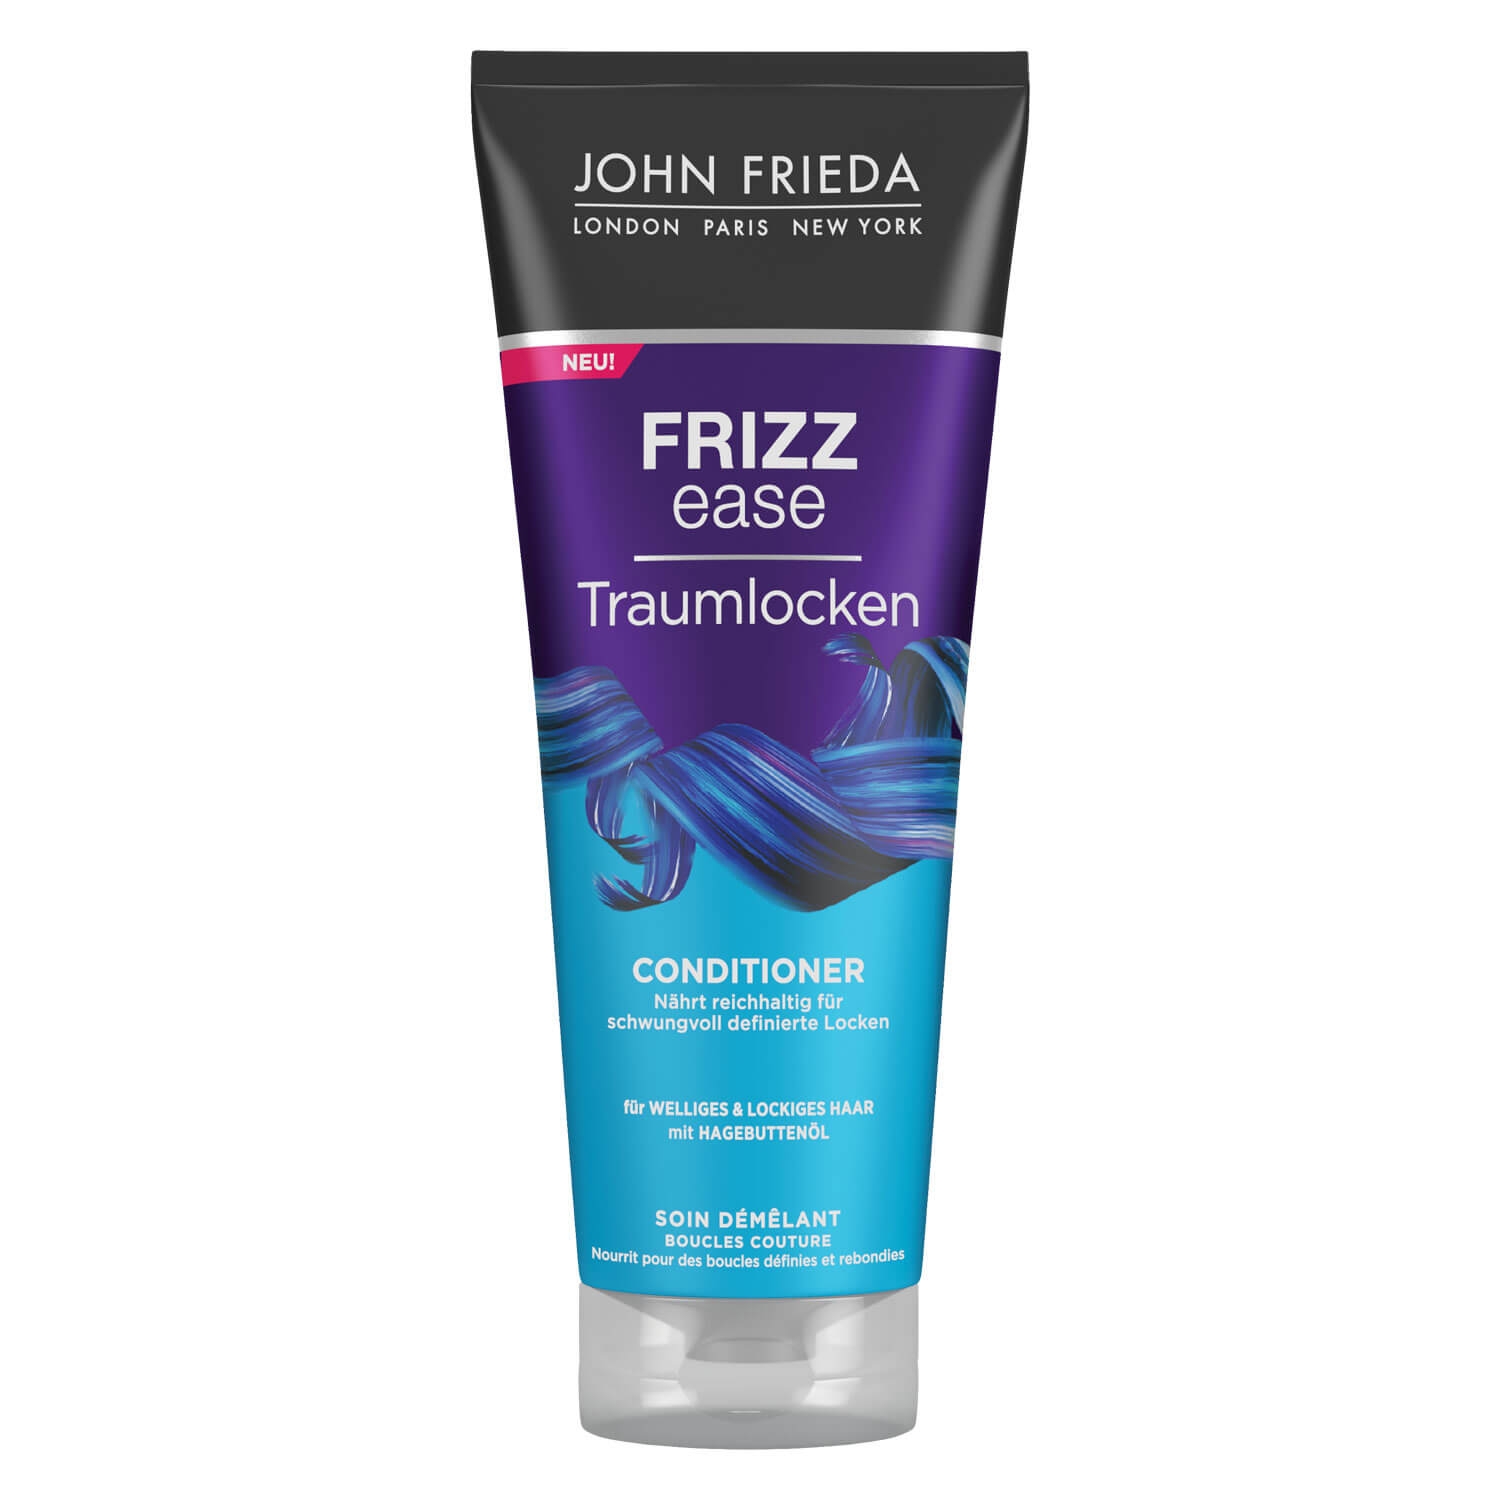 Product image from Frizz Ease - Traumlocken Conditioner